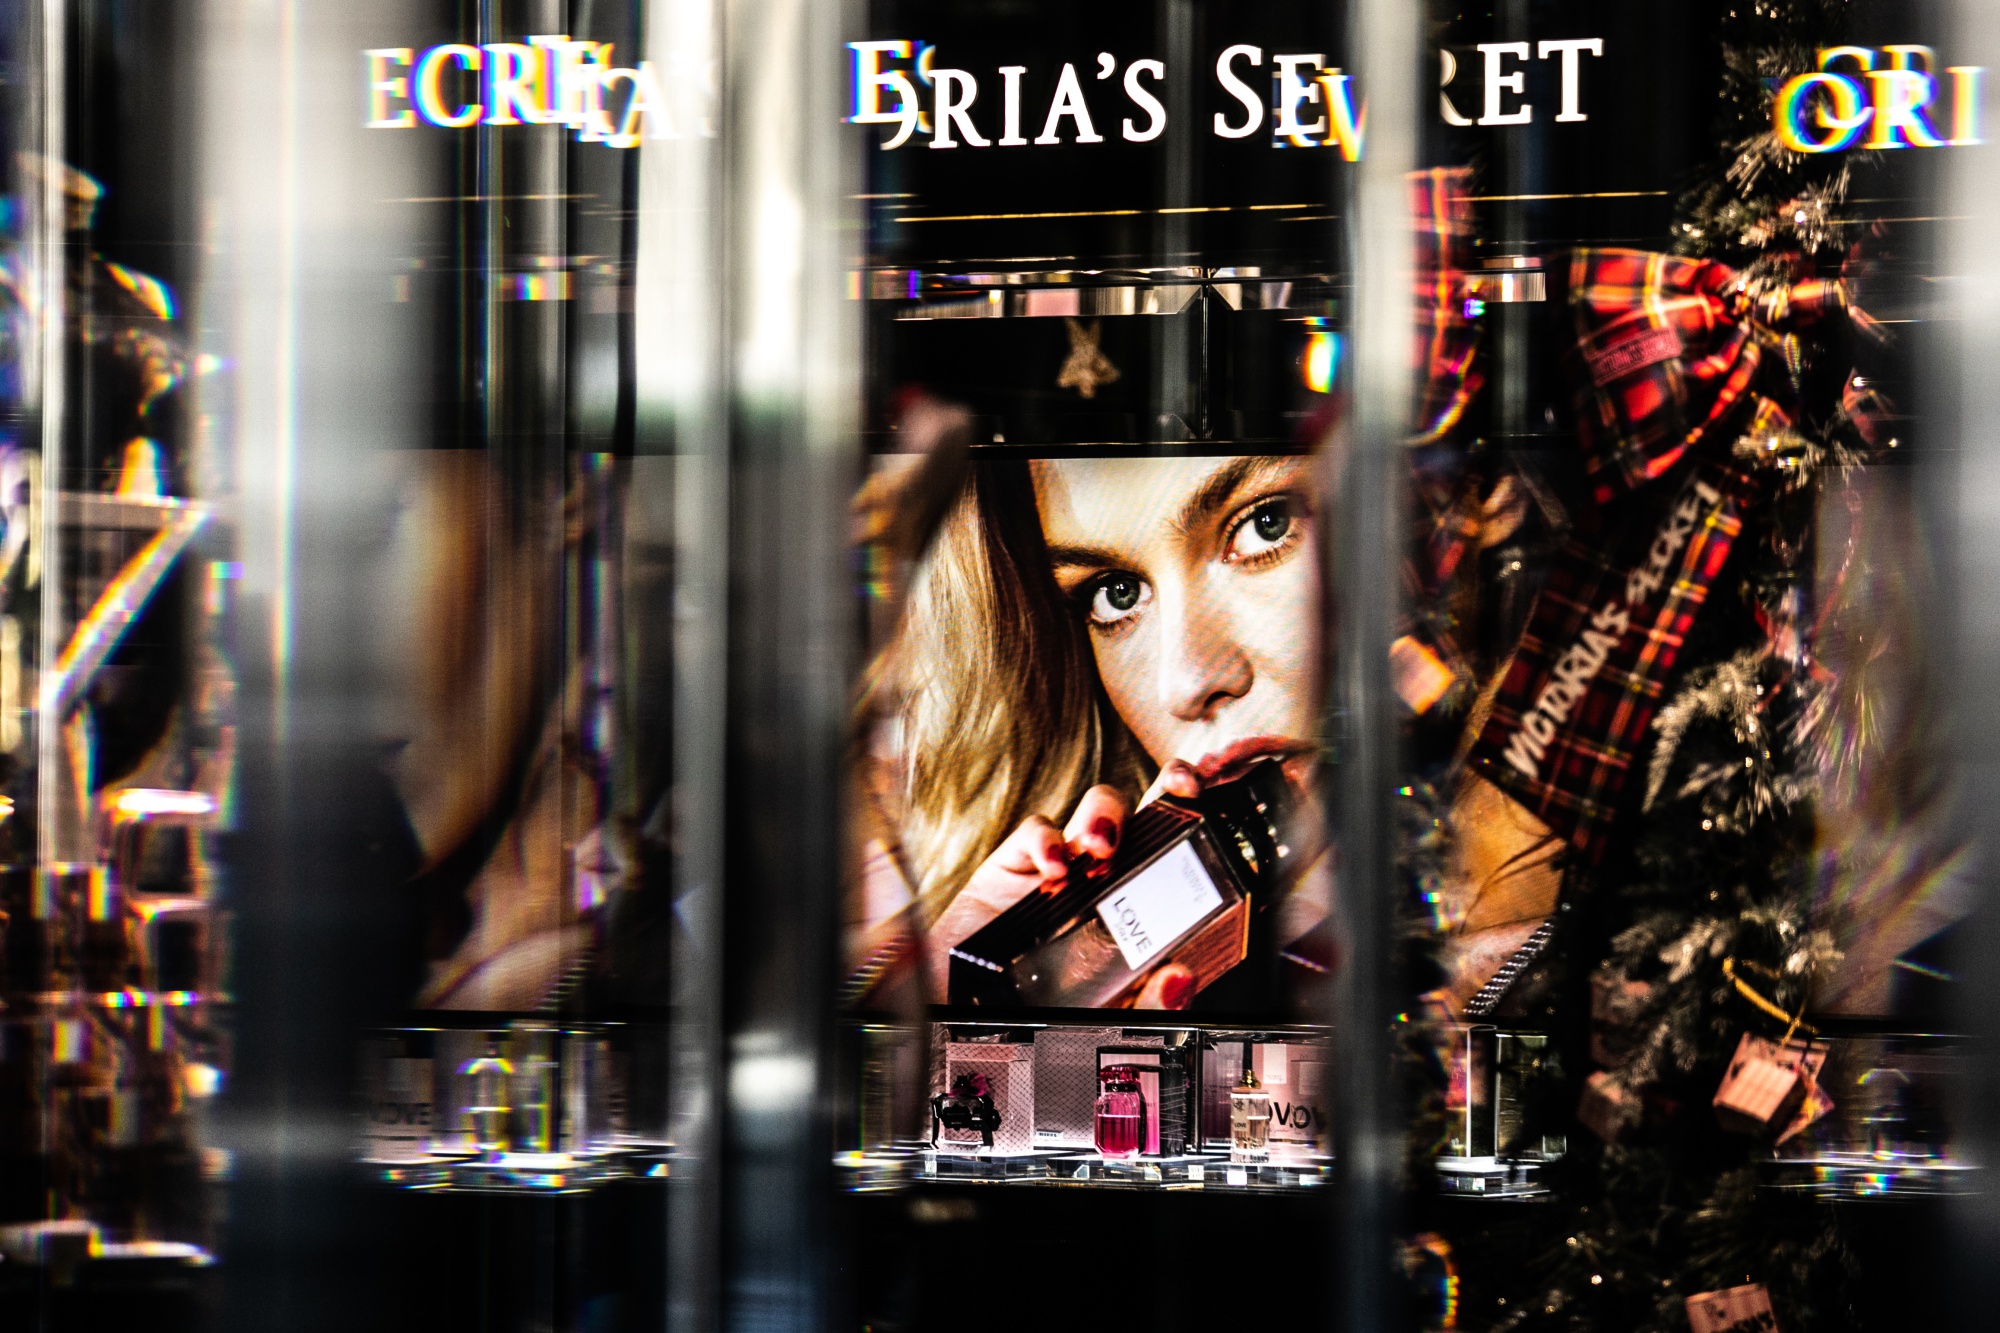 Victoria's Secret Is Being Sold for About $525 Million Amid Falling Sales